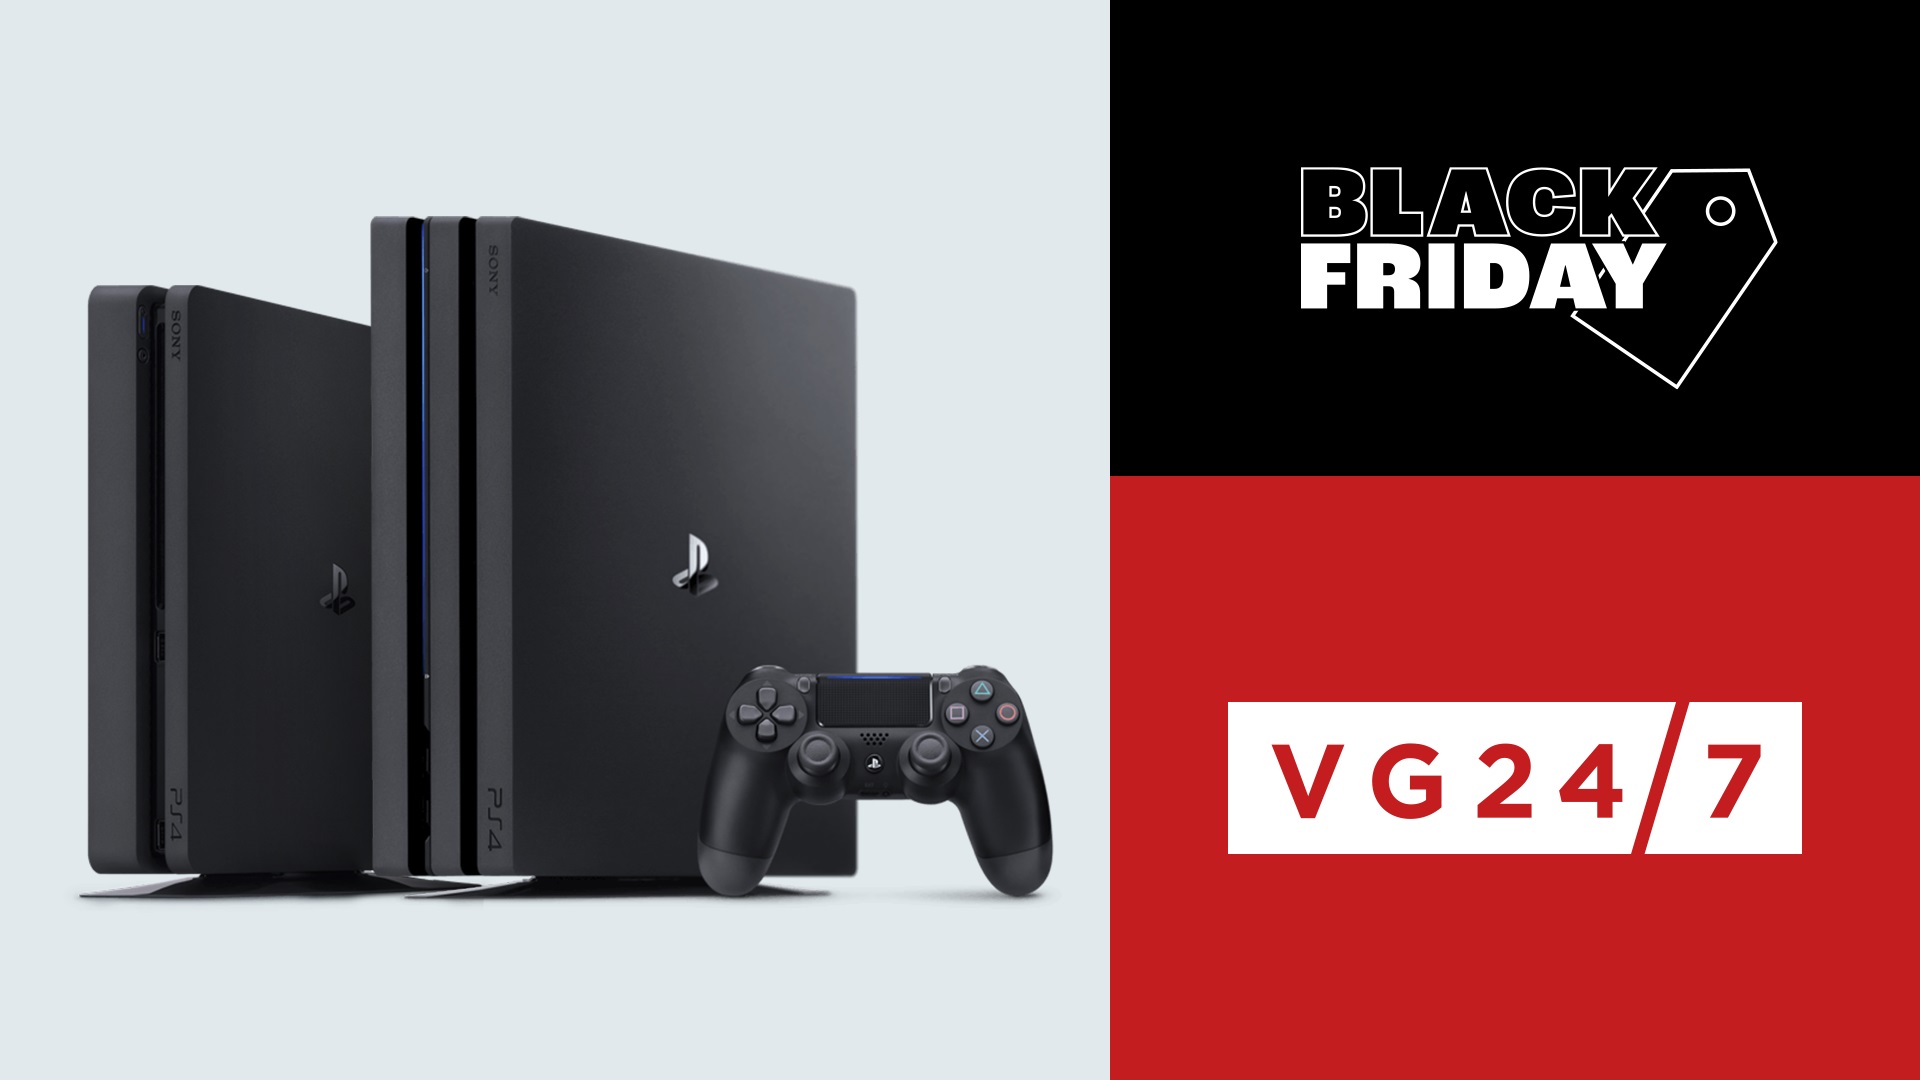   PS4 Best Black Friday Deals 2020;  Consoles, controllers, games, PSVR, and more

